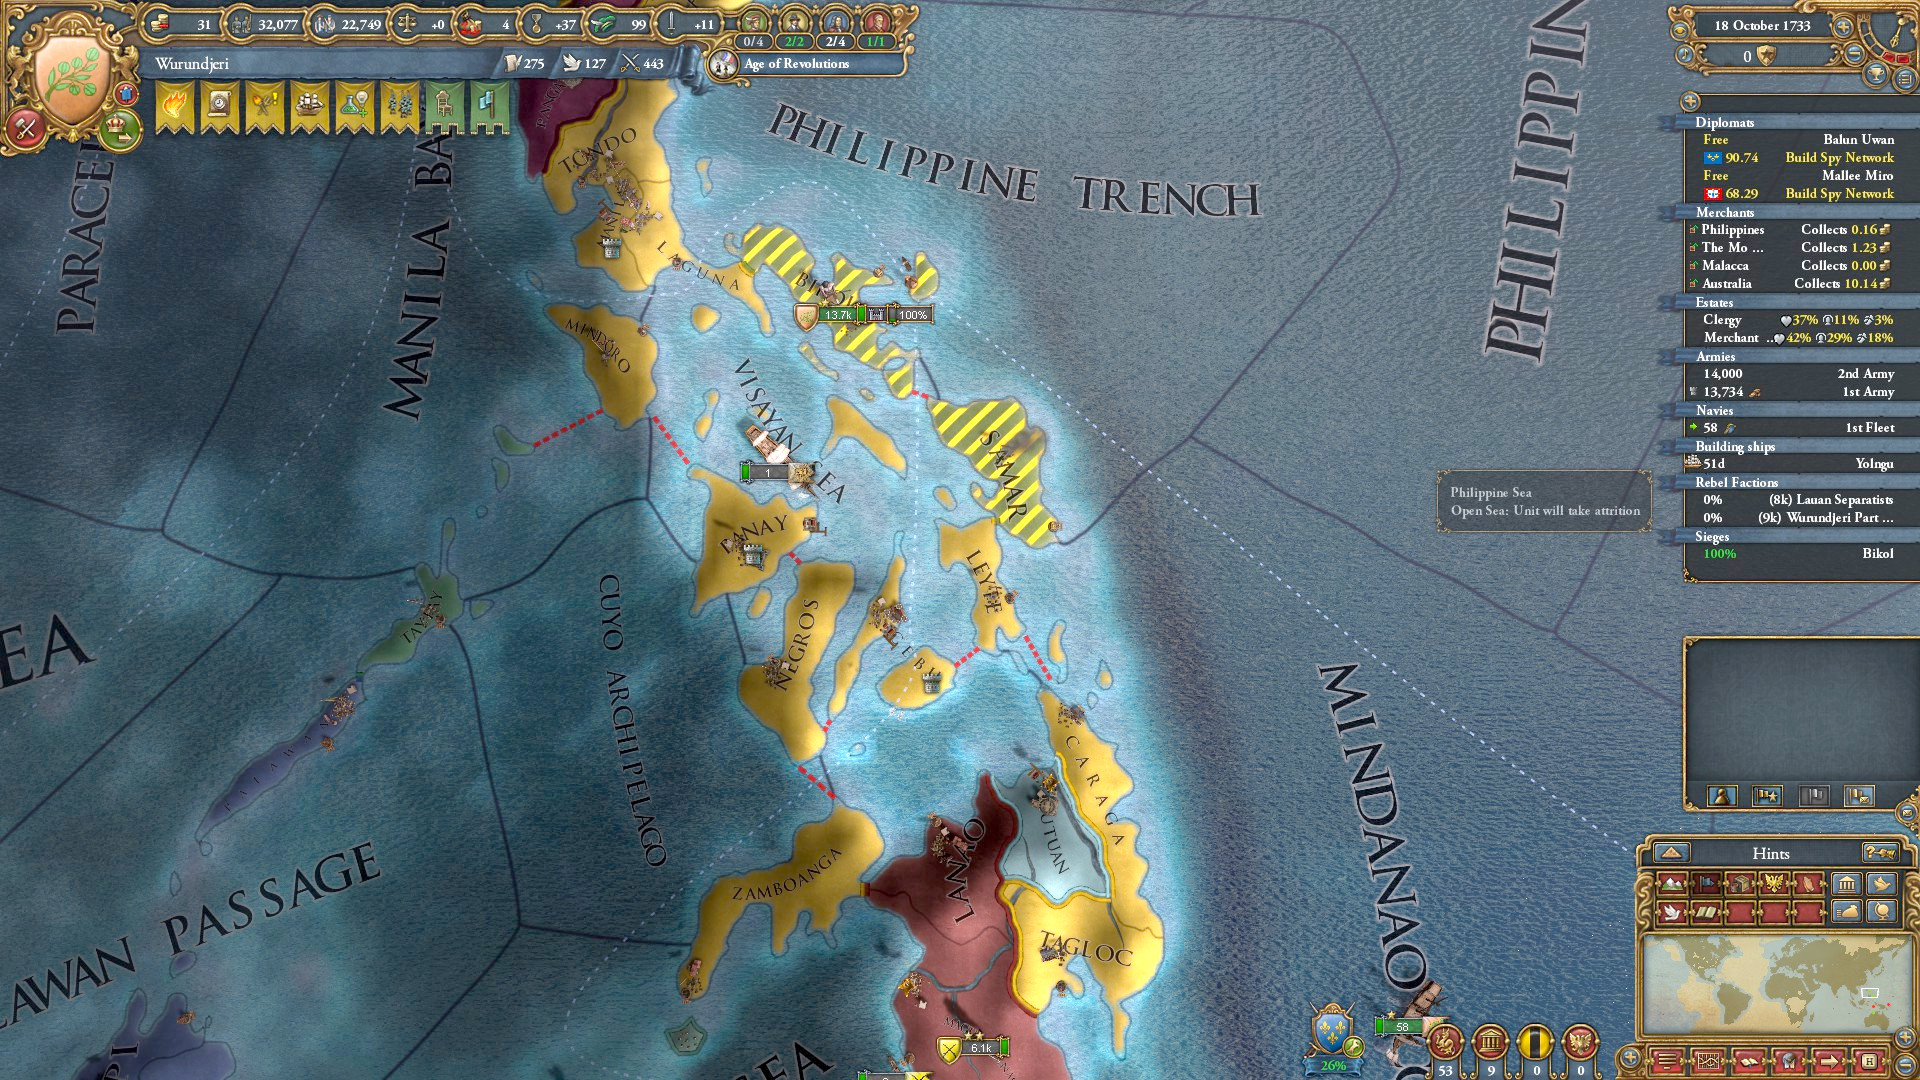 The best Europa Universalis 4 achievements - EU4 screenshot showing the in game map of the philppines